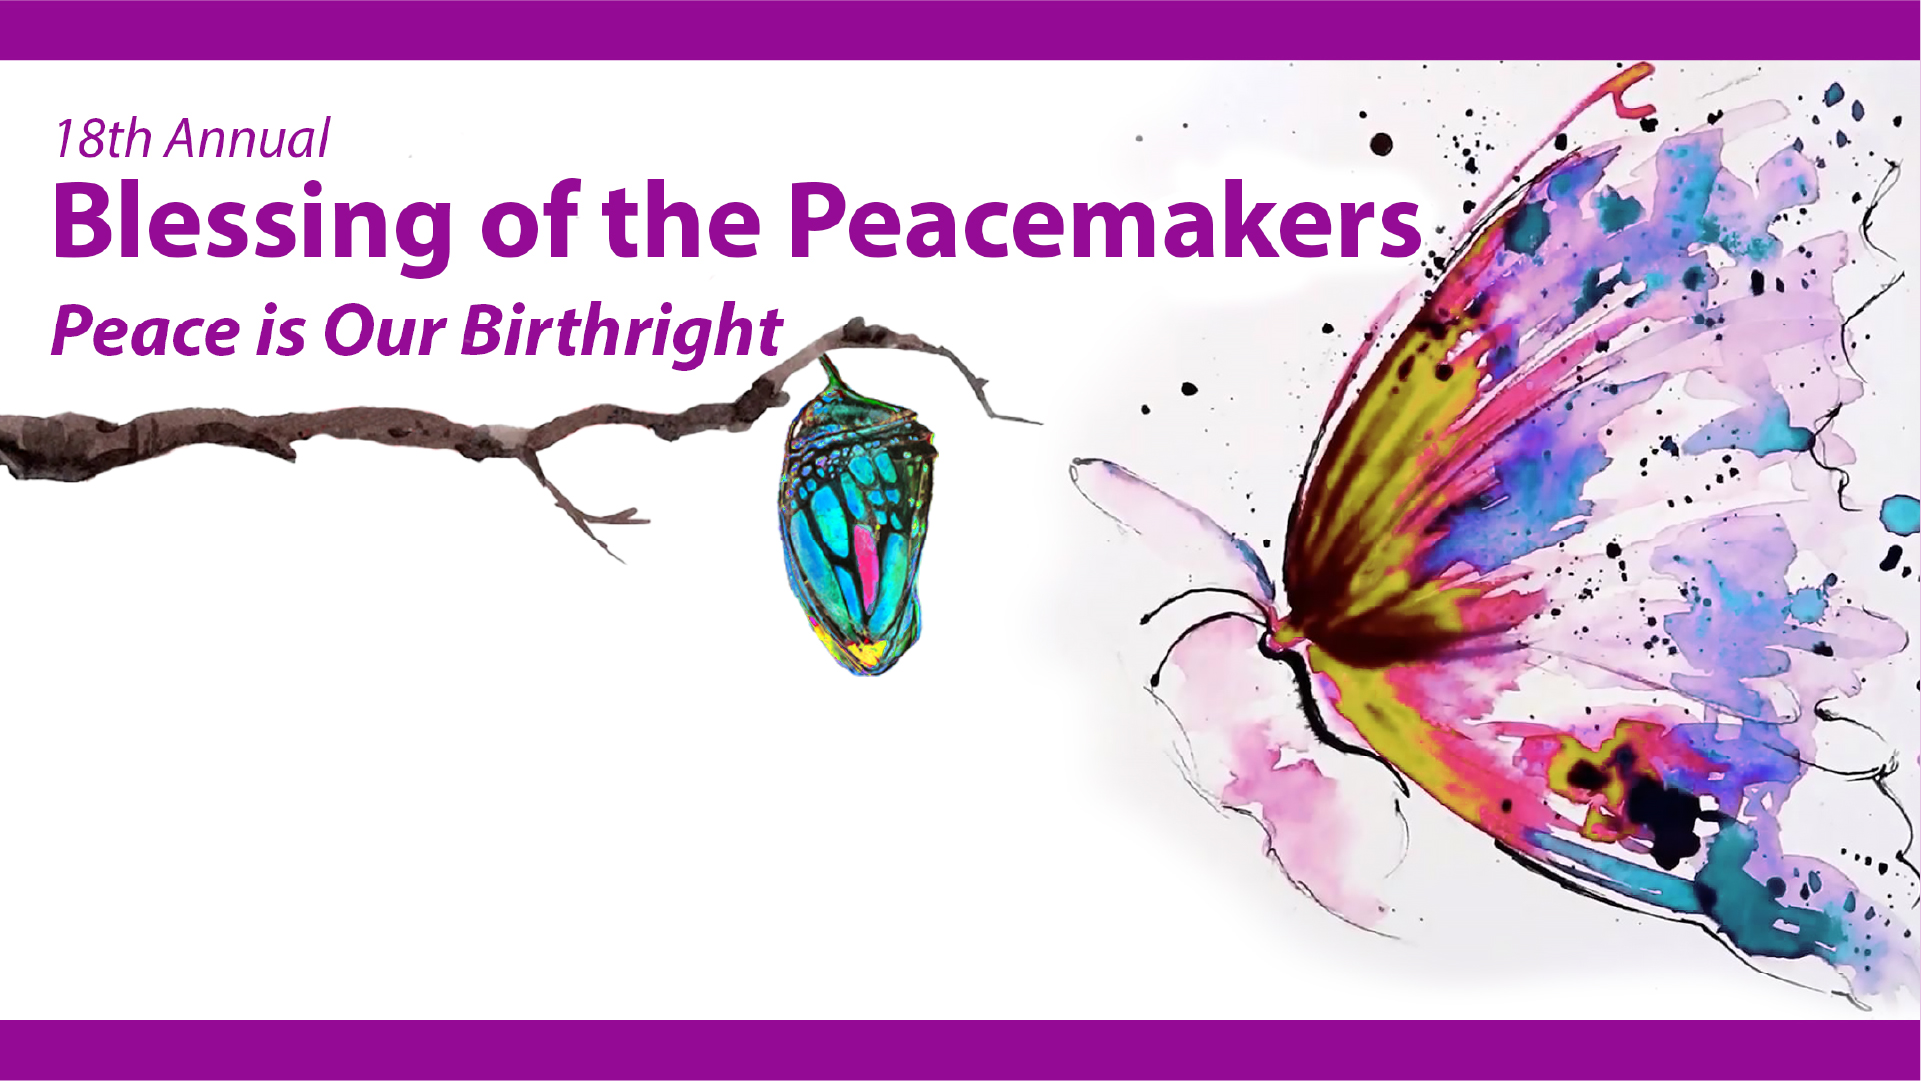 Blessing of the peacemakers - January 29